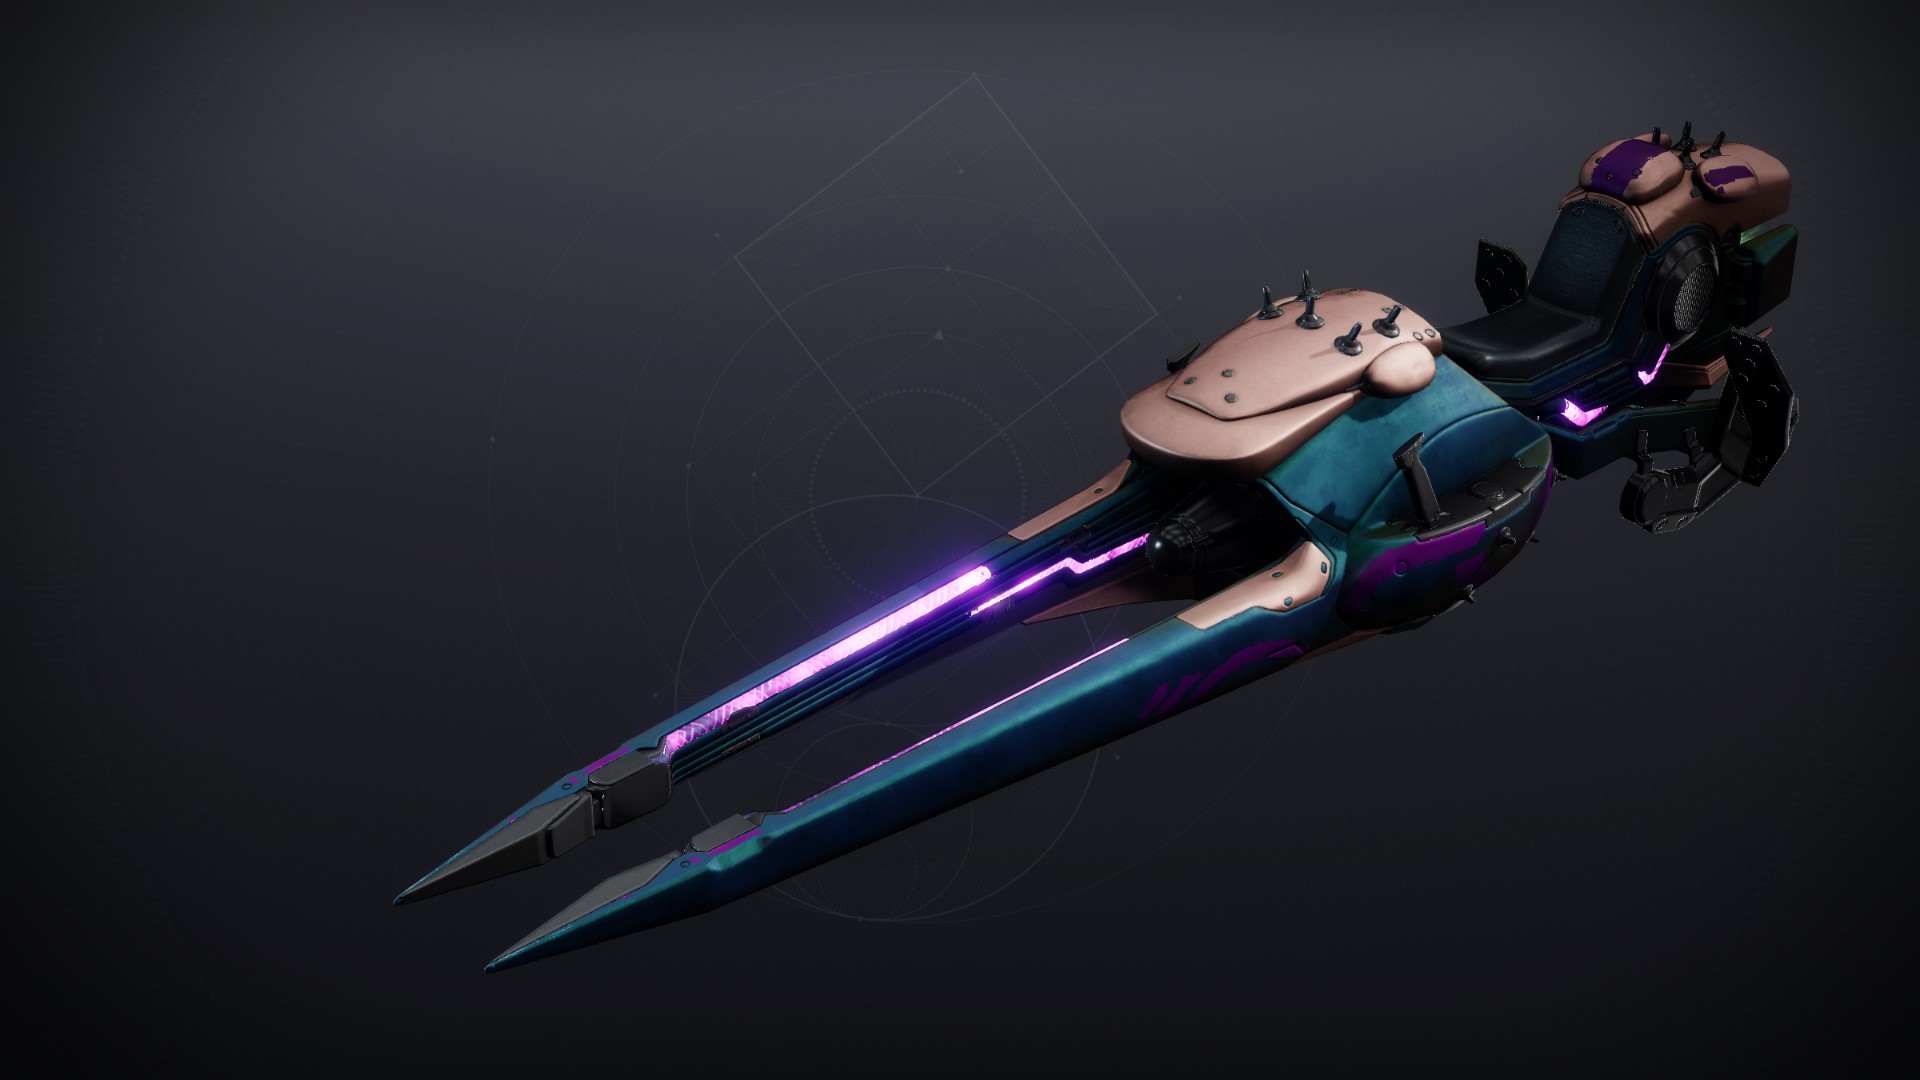 An in-game render of the Riis Racer.